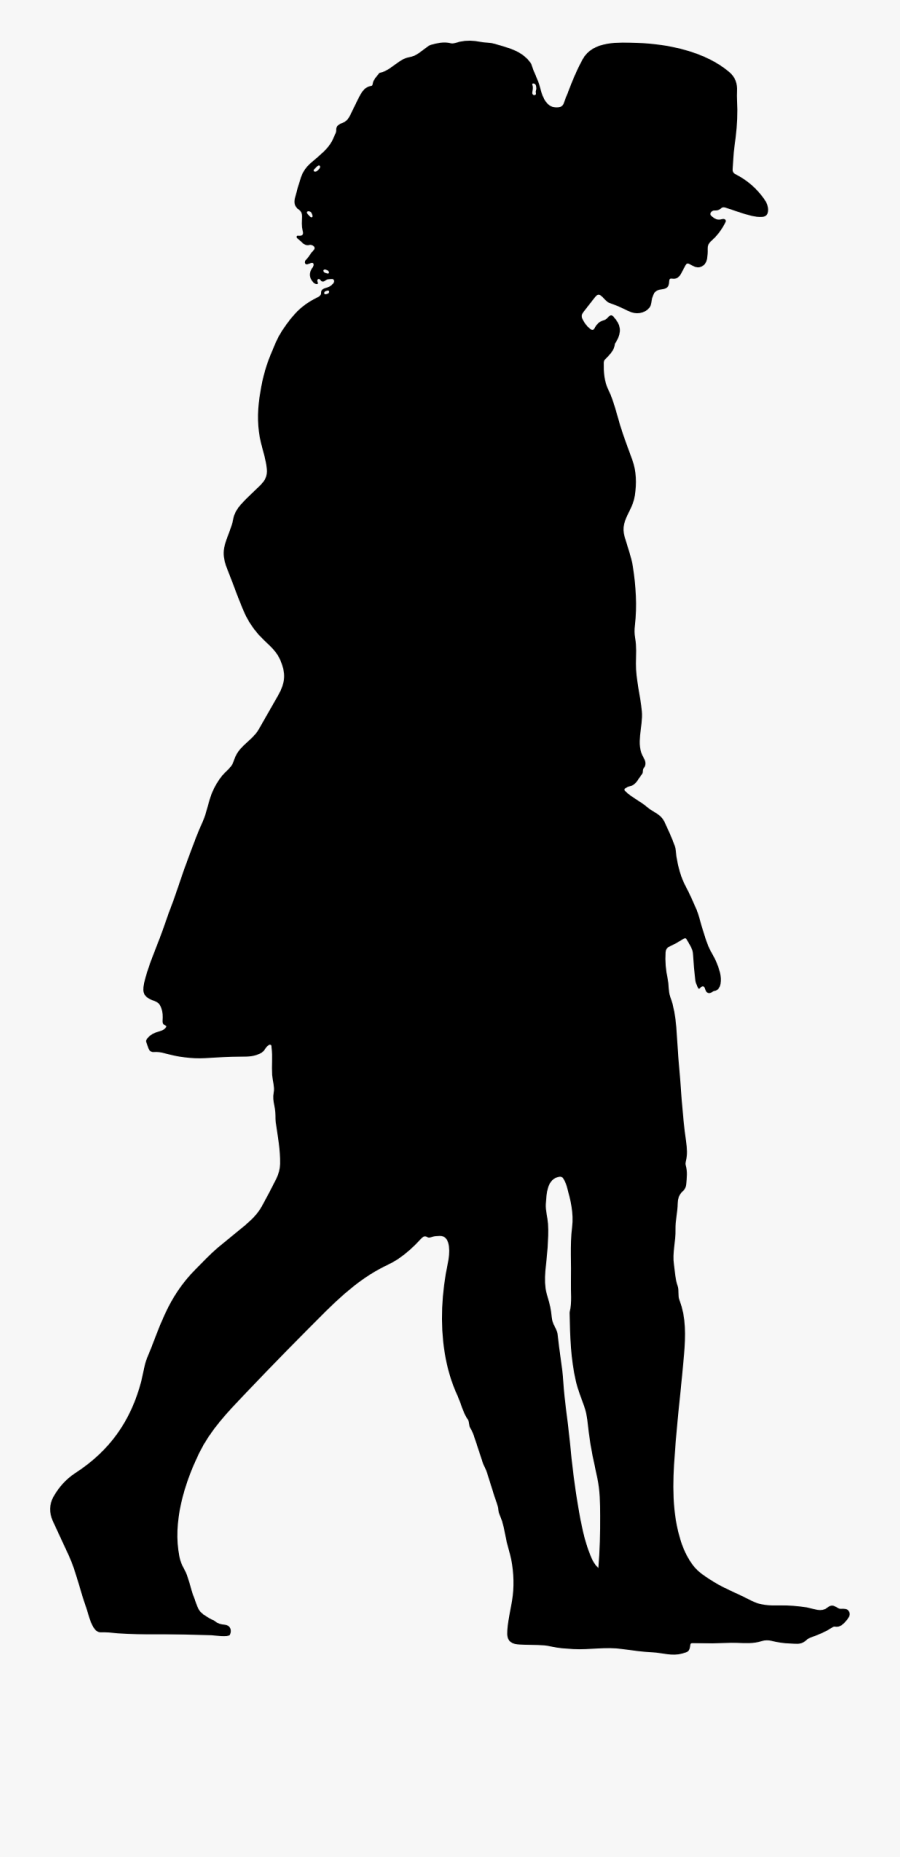 Clipart - Silhouette People Walking Png, Transparent Clipart